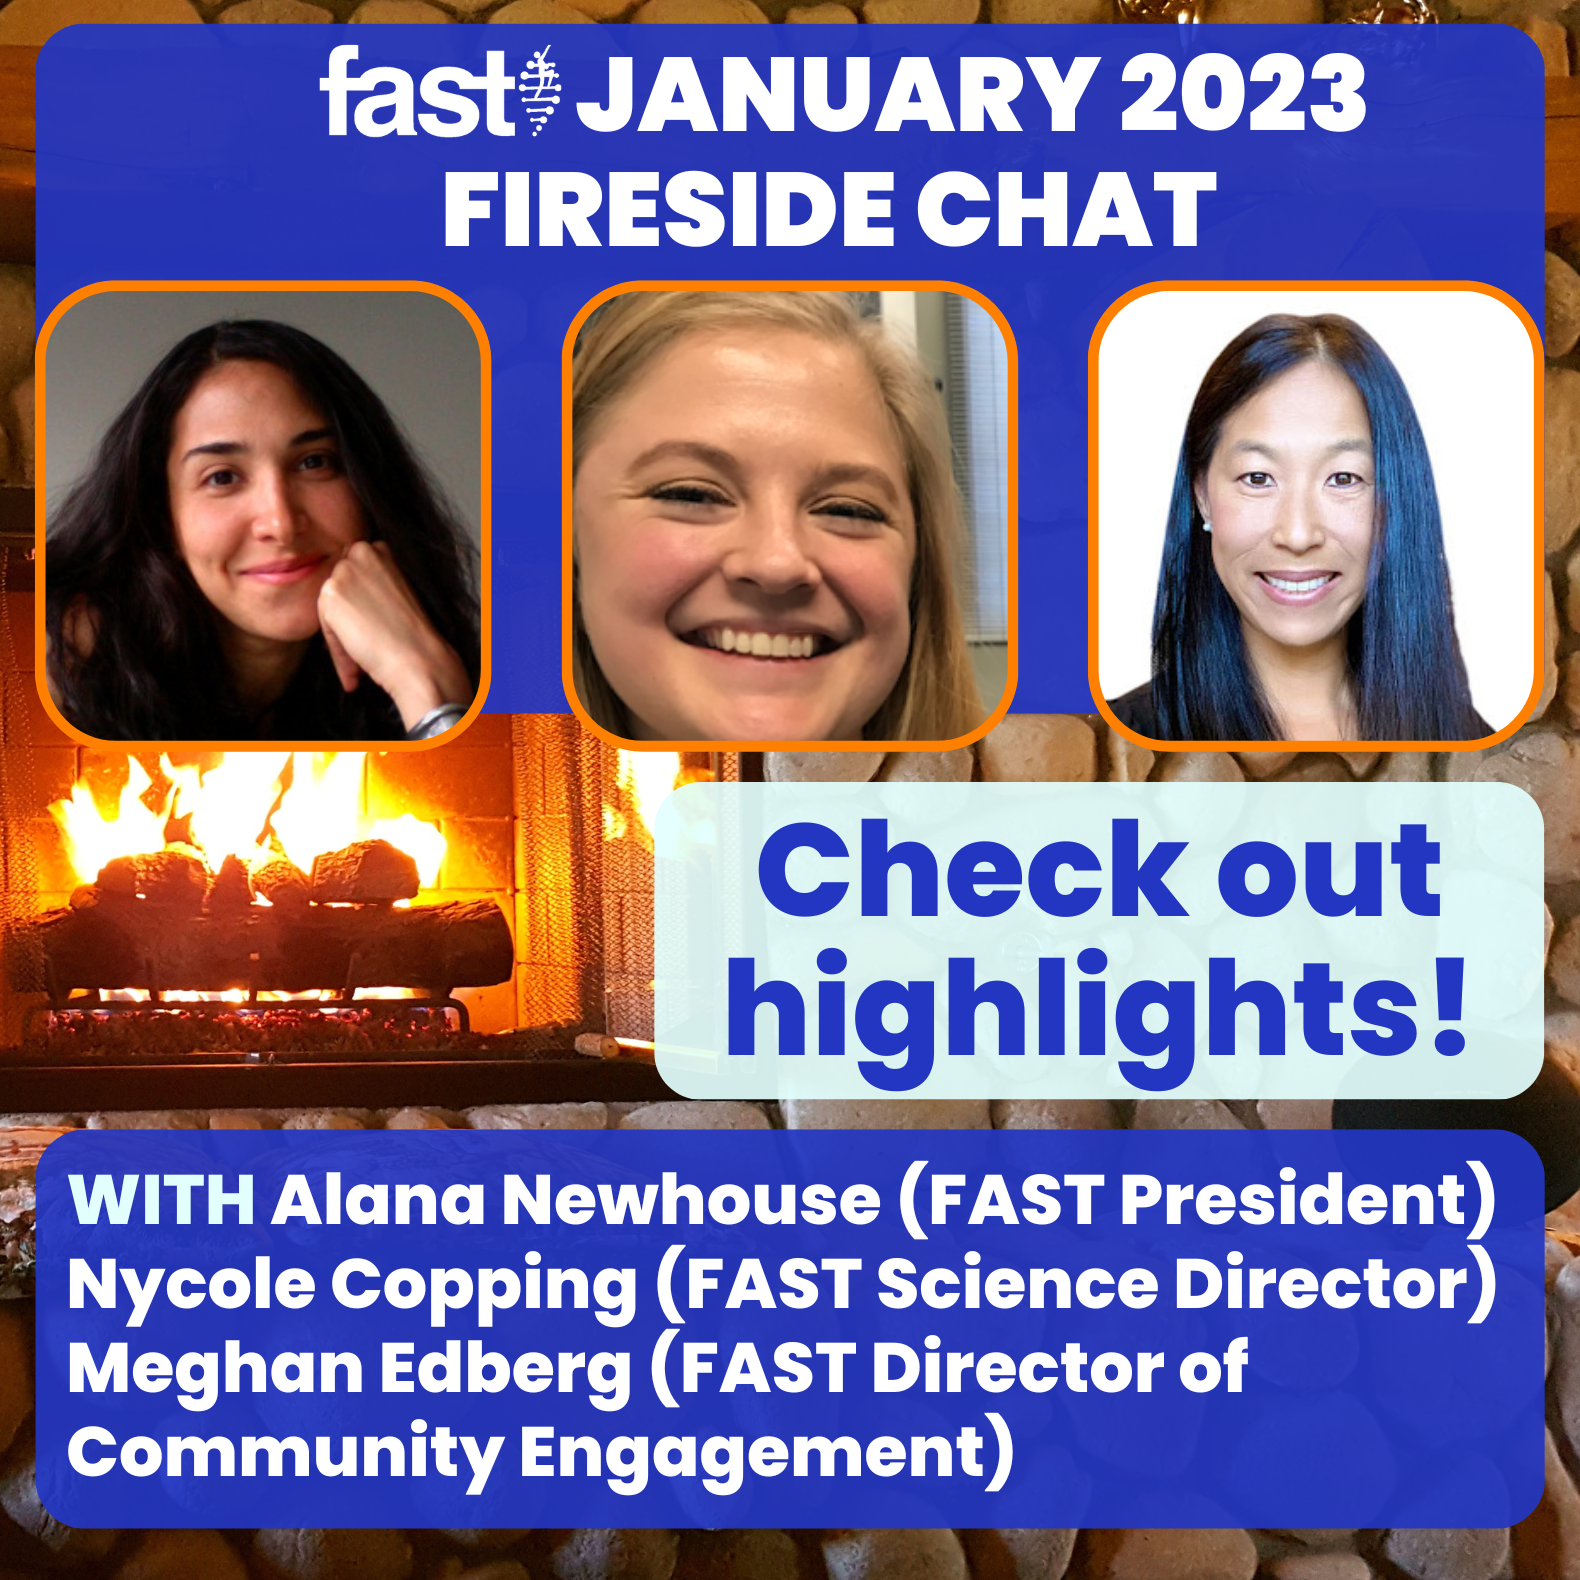 FAST January 2023 Fireside Chat - WITH Alana Newhouse (FAST President) Nycole Copping (FAST Science Director) Meghan Edberg (FAST Director of Community Engagement), check out highlights! Headshots of all three speakers